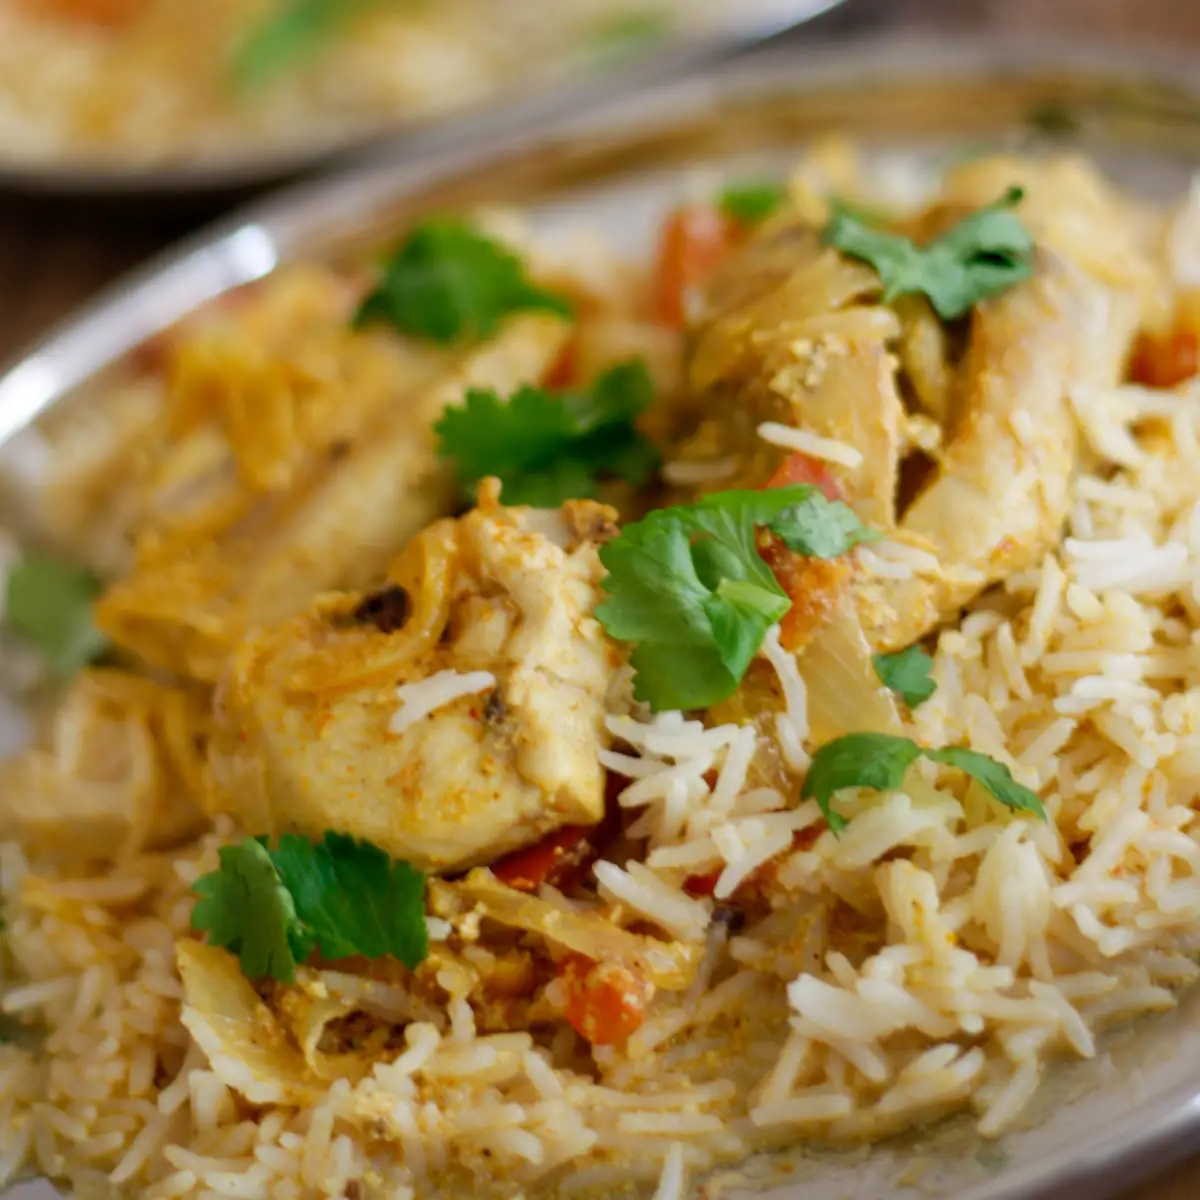 Chicken biryani with chicken pieces, rice, onions, cilantro and tomatoes on a silver plate